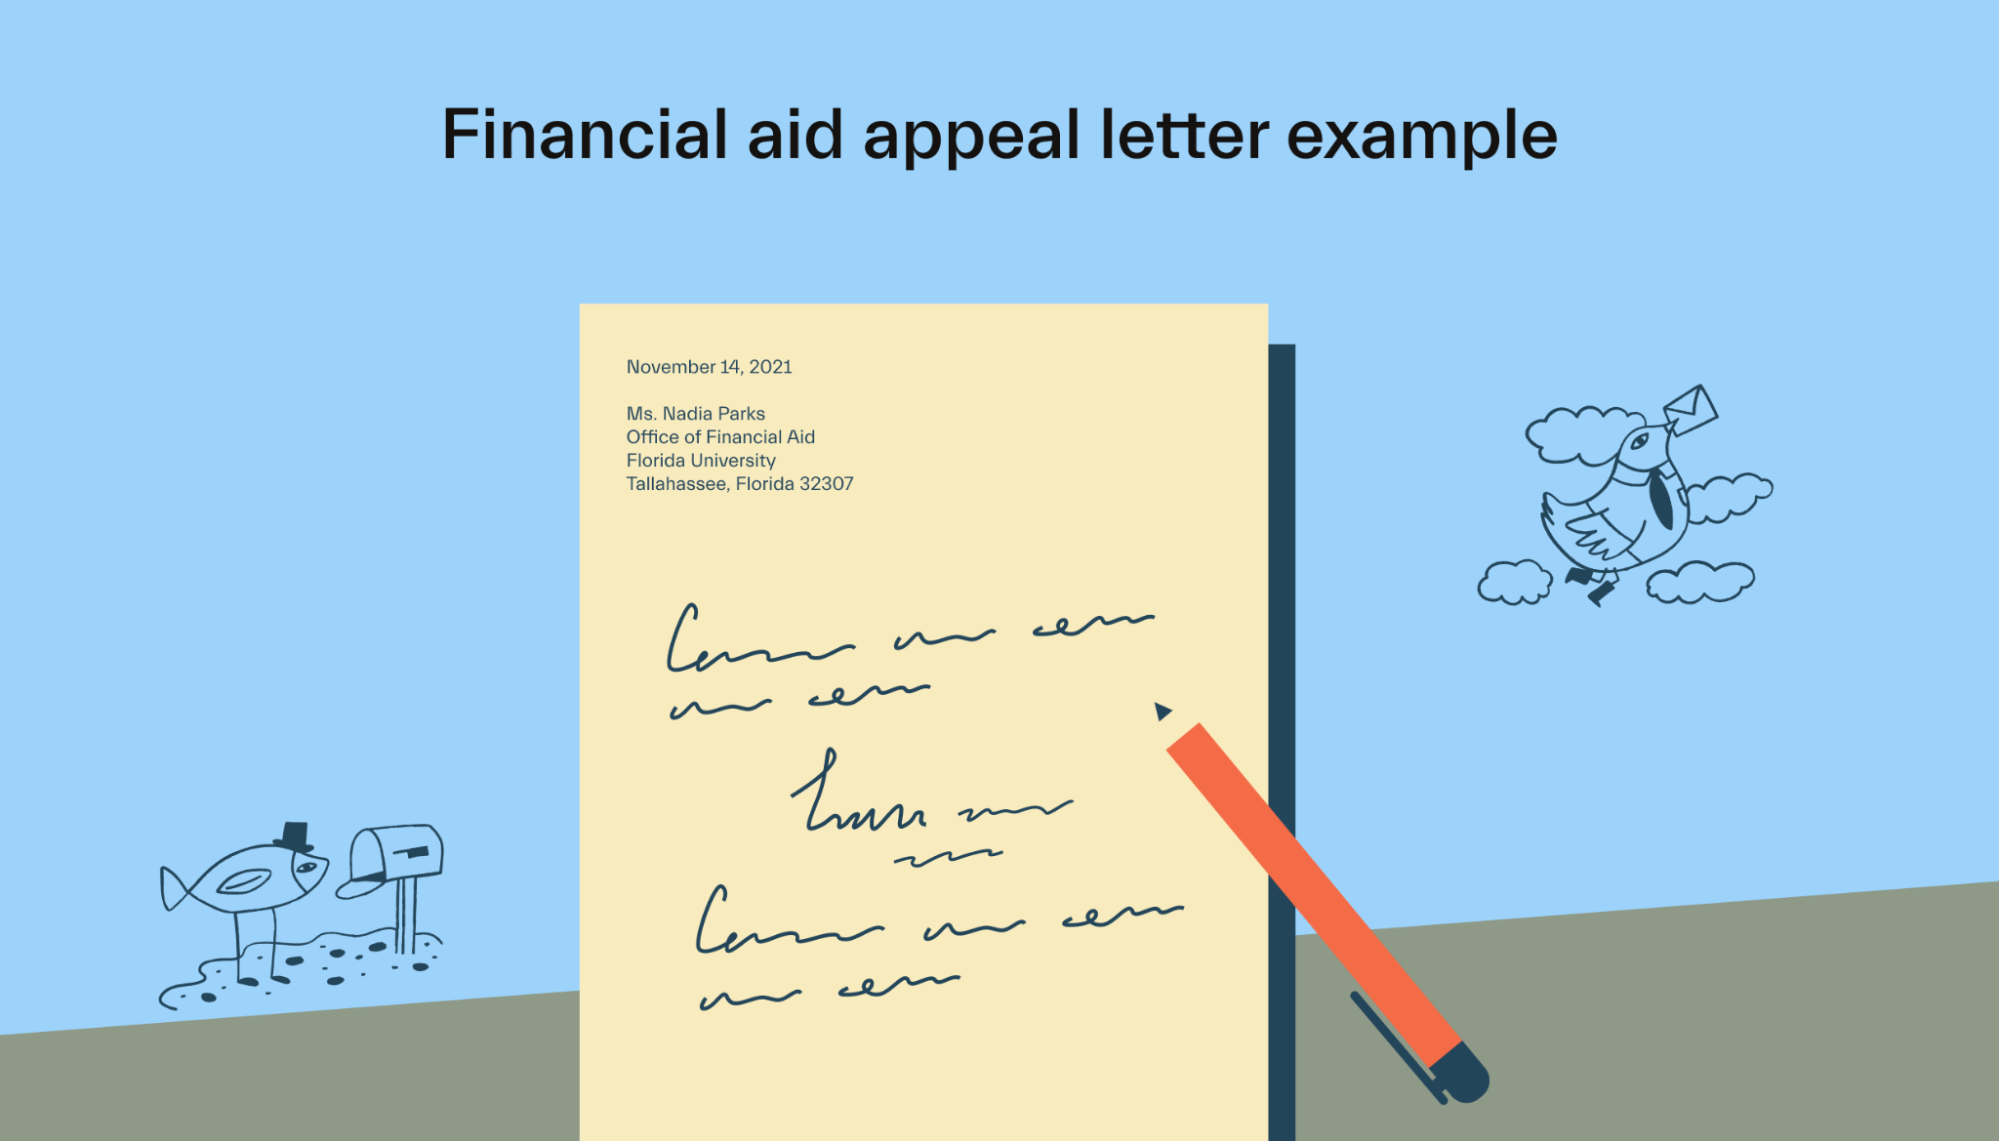 Financial aid appeal letter example